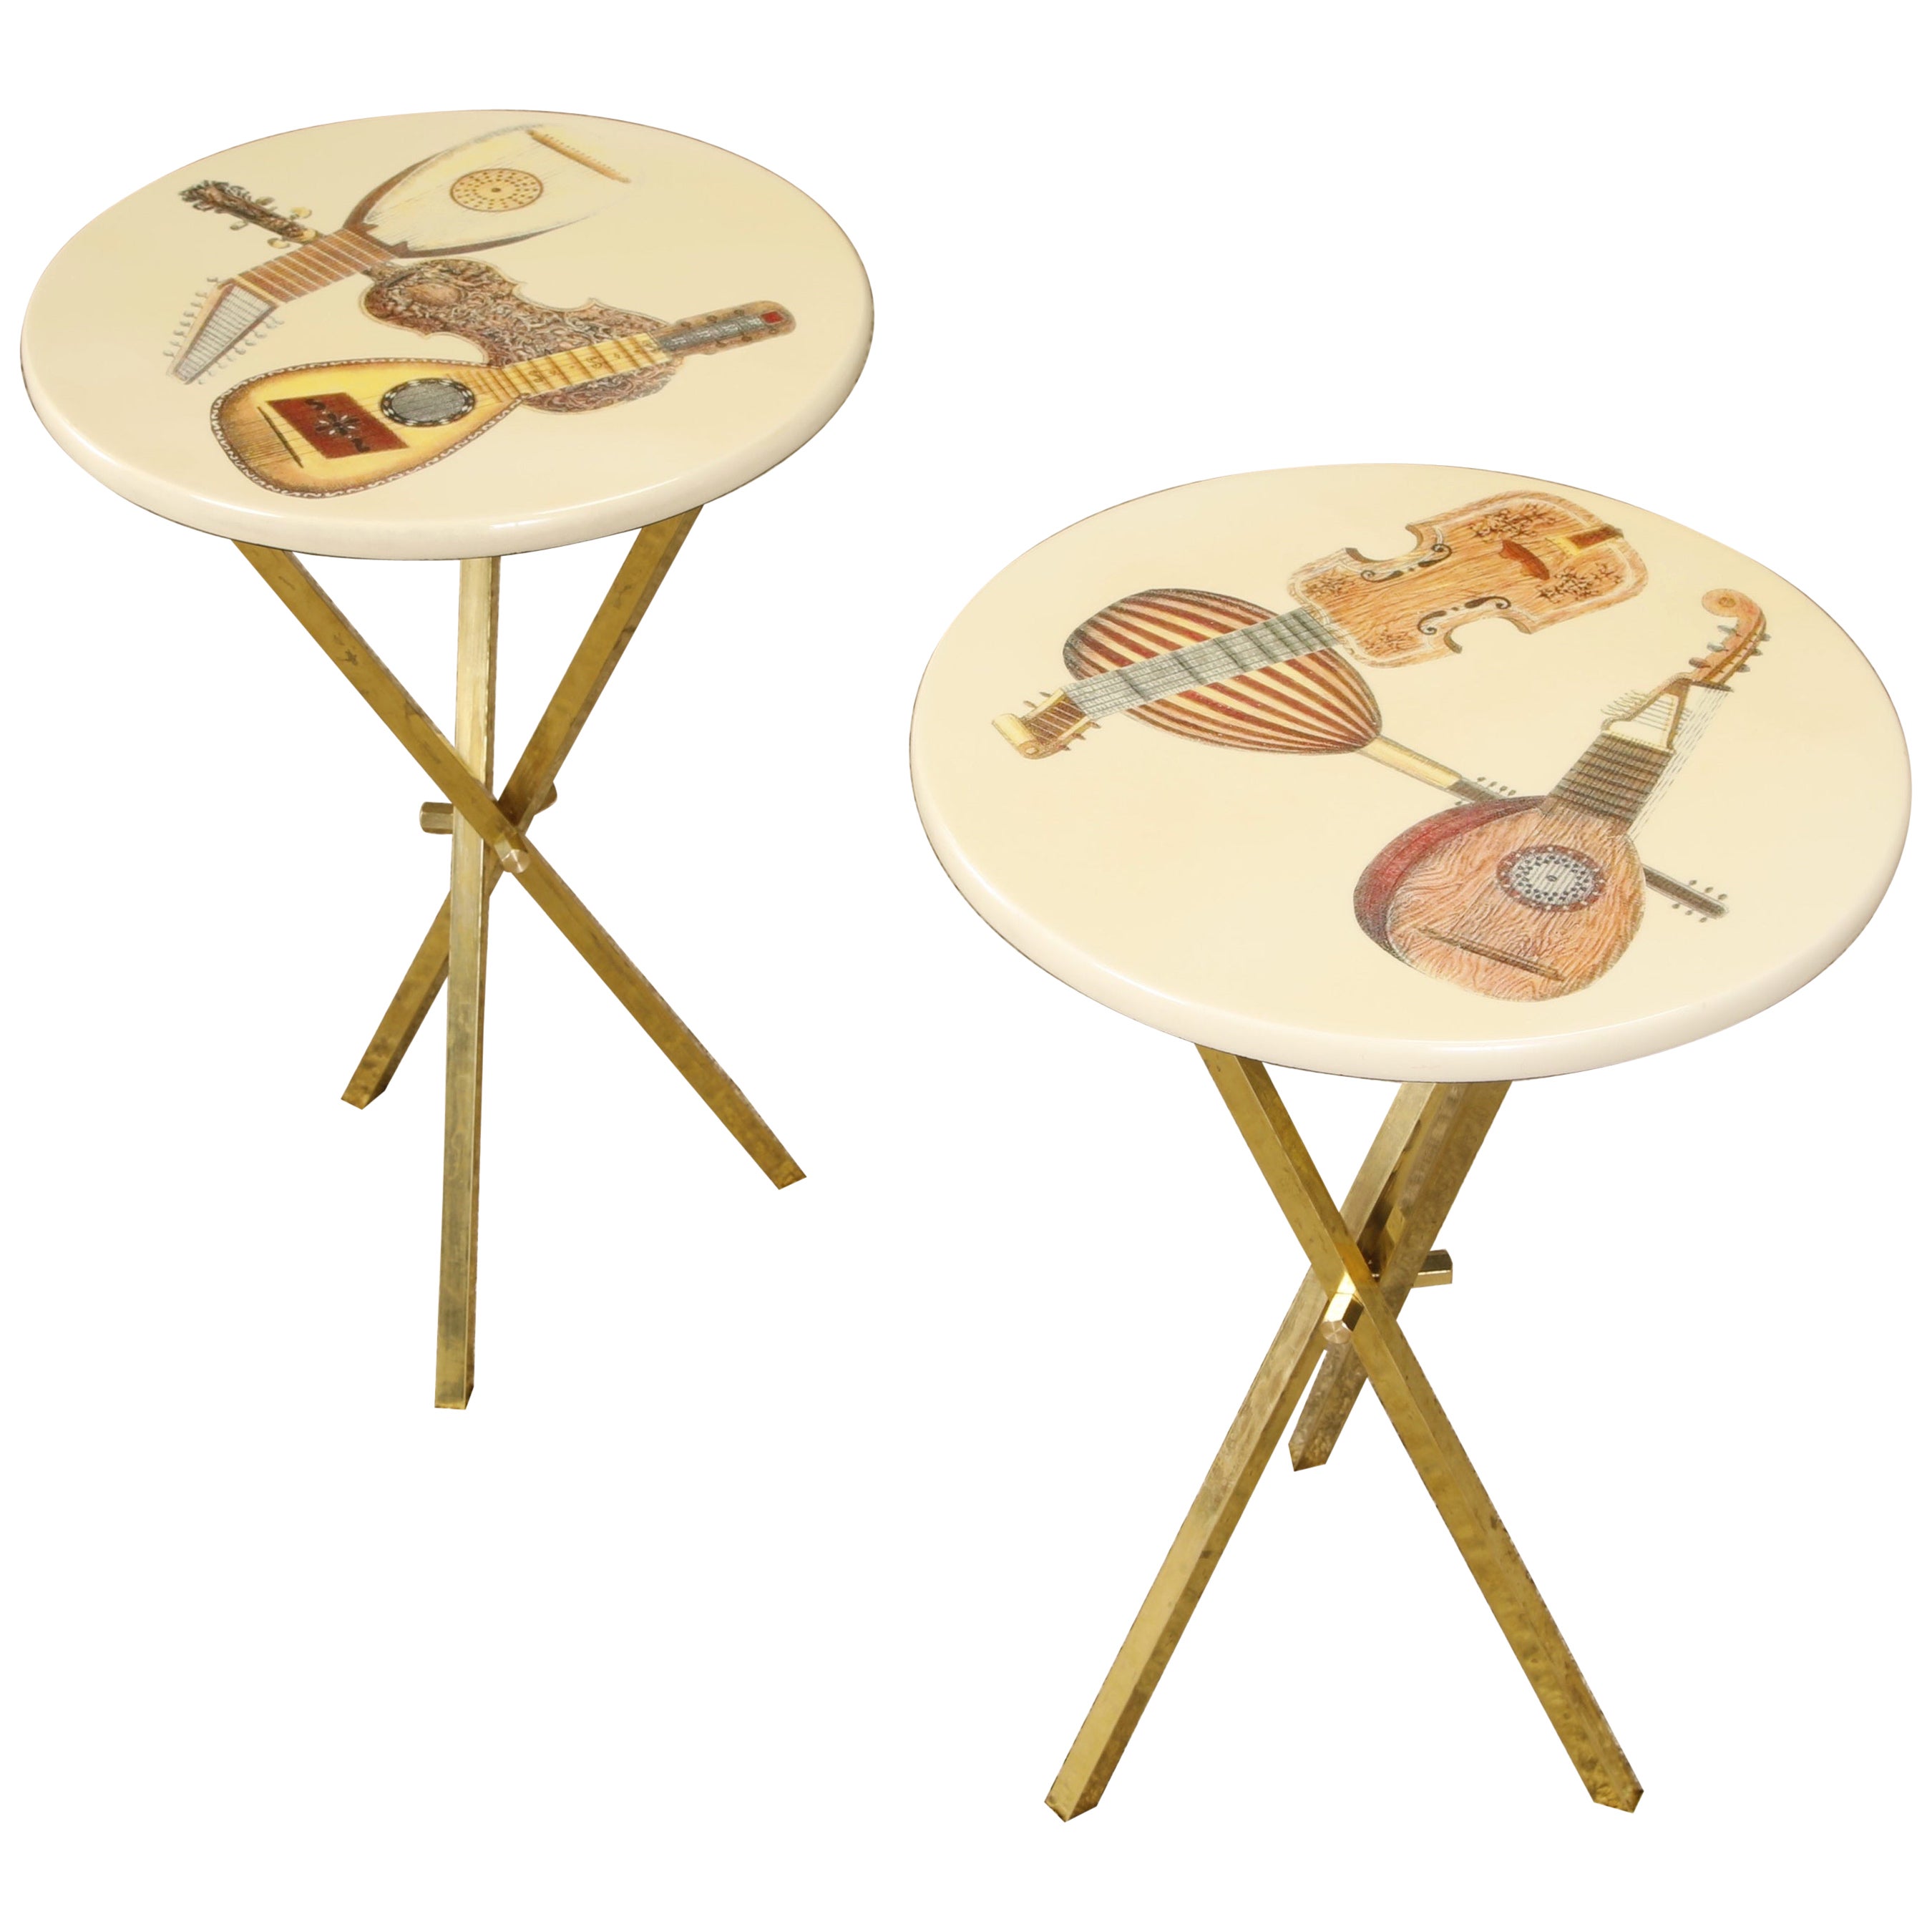 'Strumenti Musicali' Drinks / Side Tables by Piero Fornasetti, c 1970s, Signed For Sale